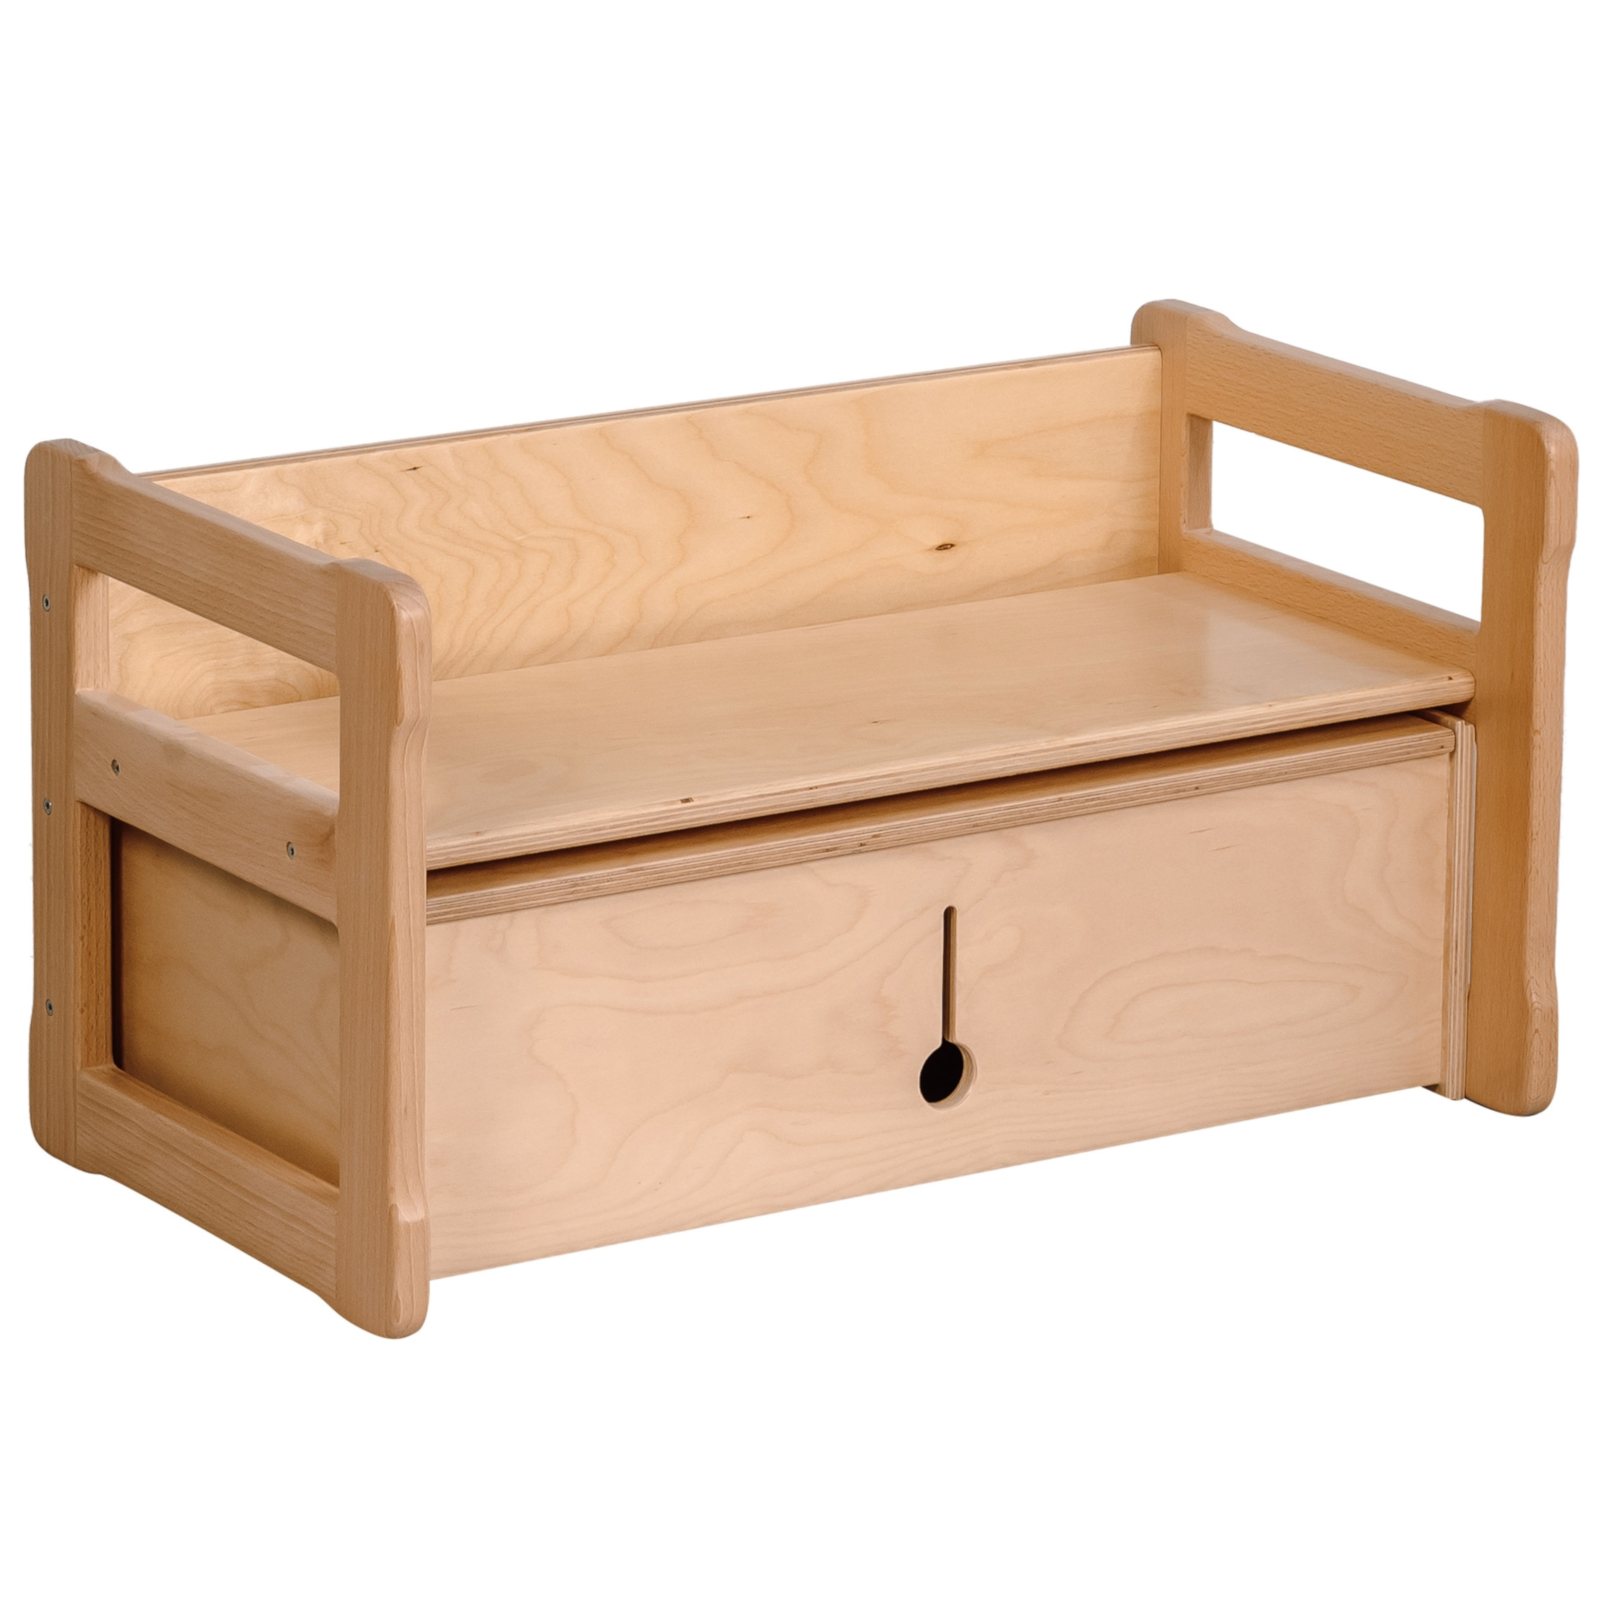 WOOD & LUCK Multifunktionale Bank mit Doppelbox natur